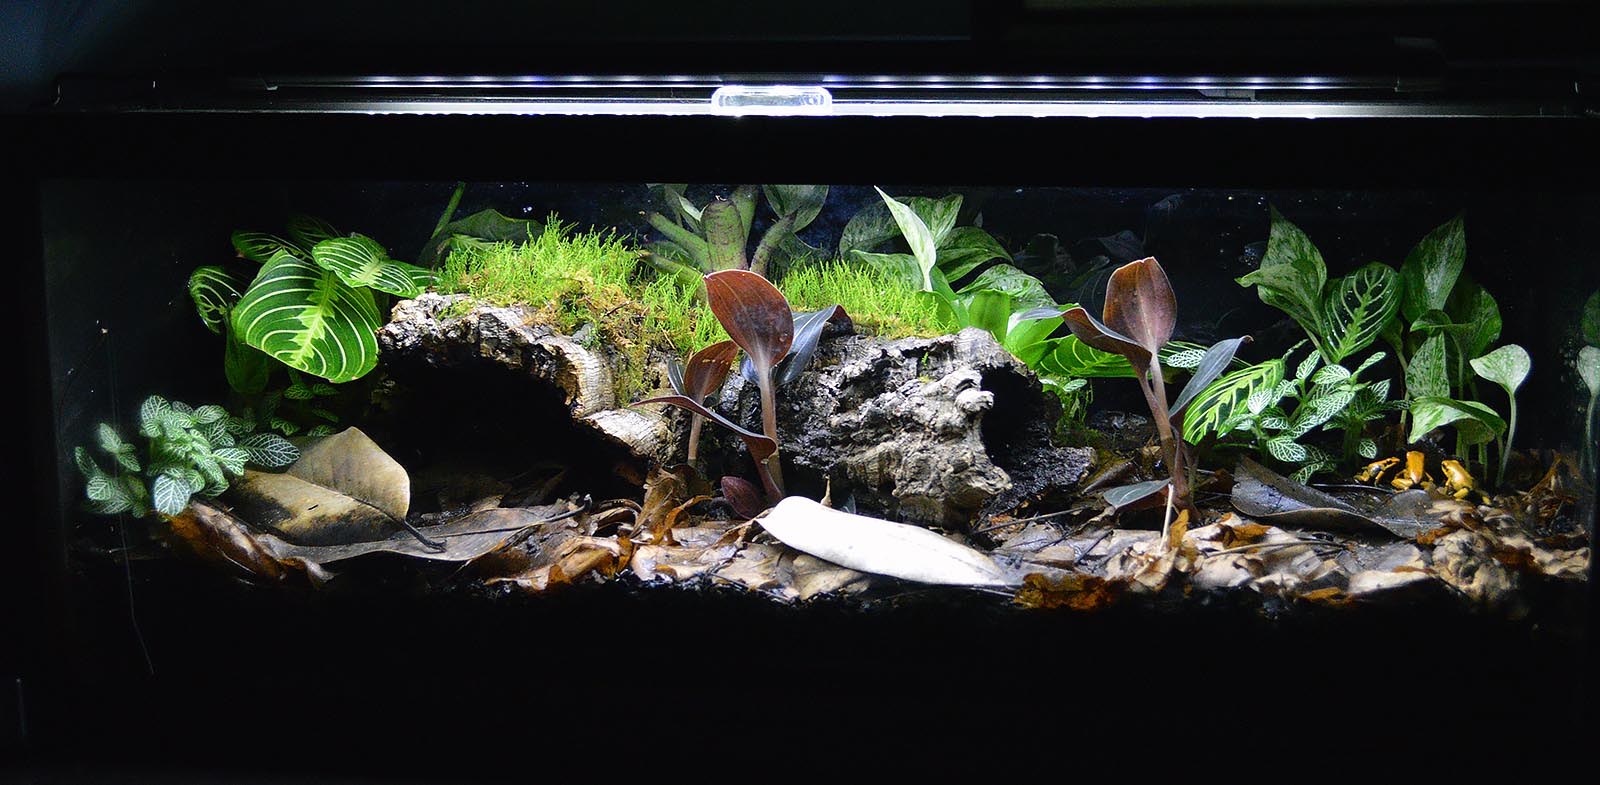 A very simple to set up Poison Dart Frog vivarium in a 20-long aquarium, which houses Phyllobates terribilis "Orange". My then 7-year old son chose the plants and created the layout.